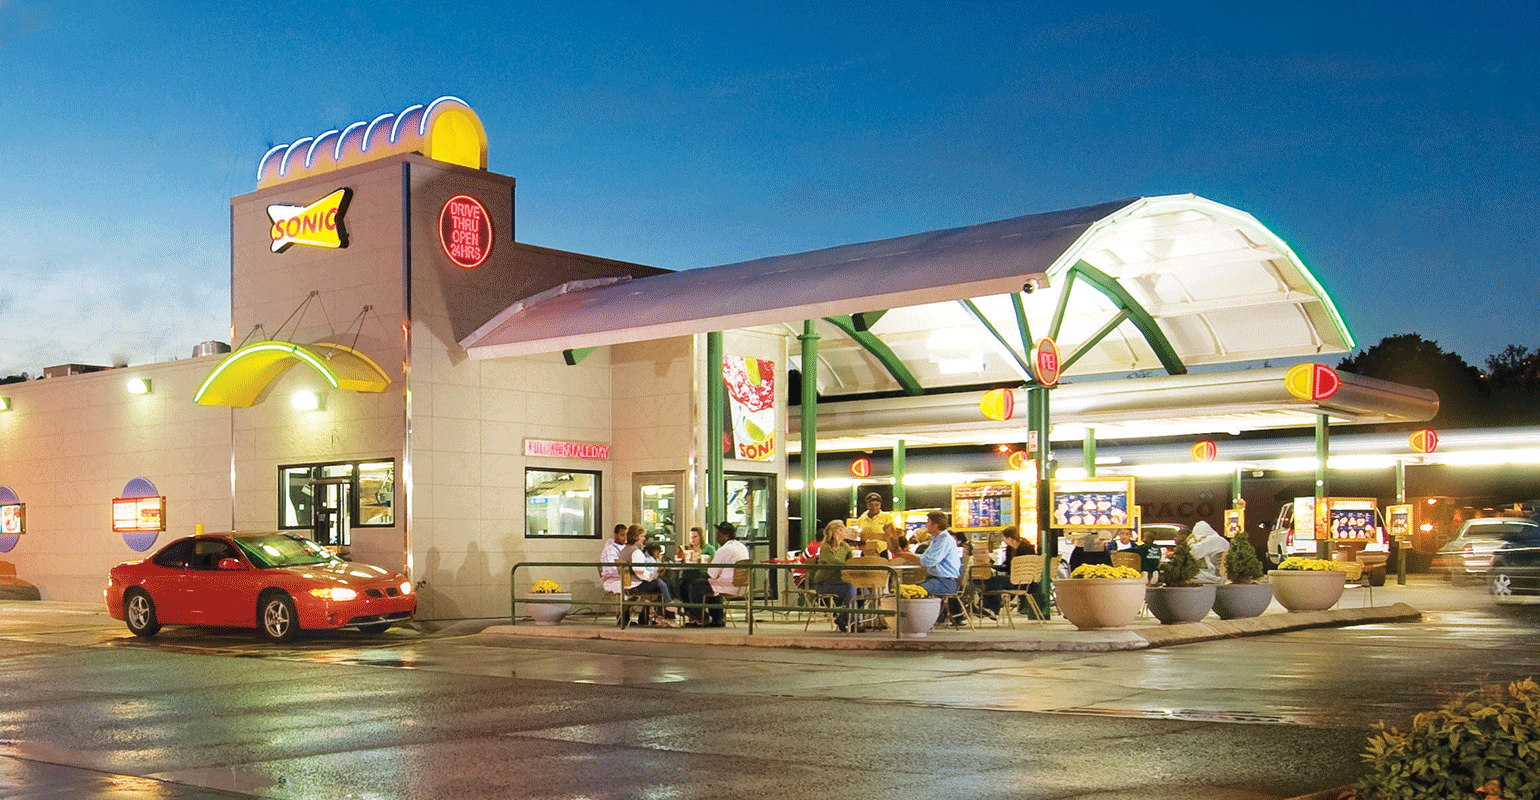 Sonic looks to marketing to improve traffic